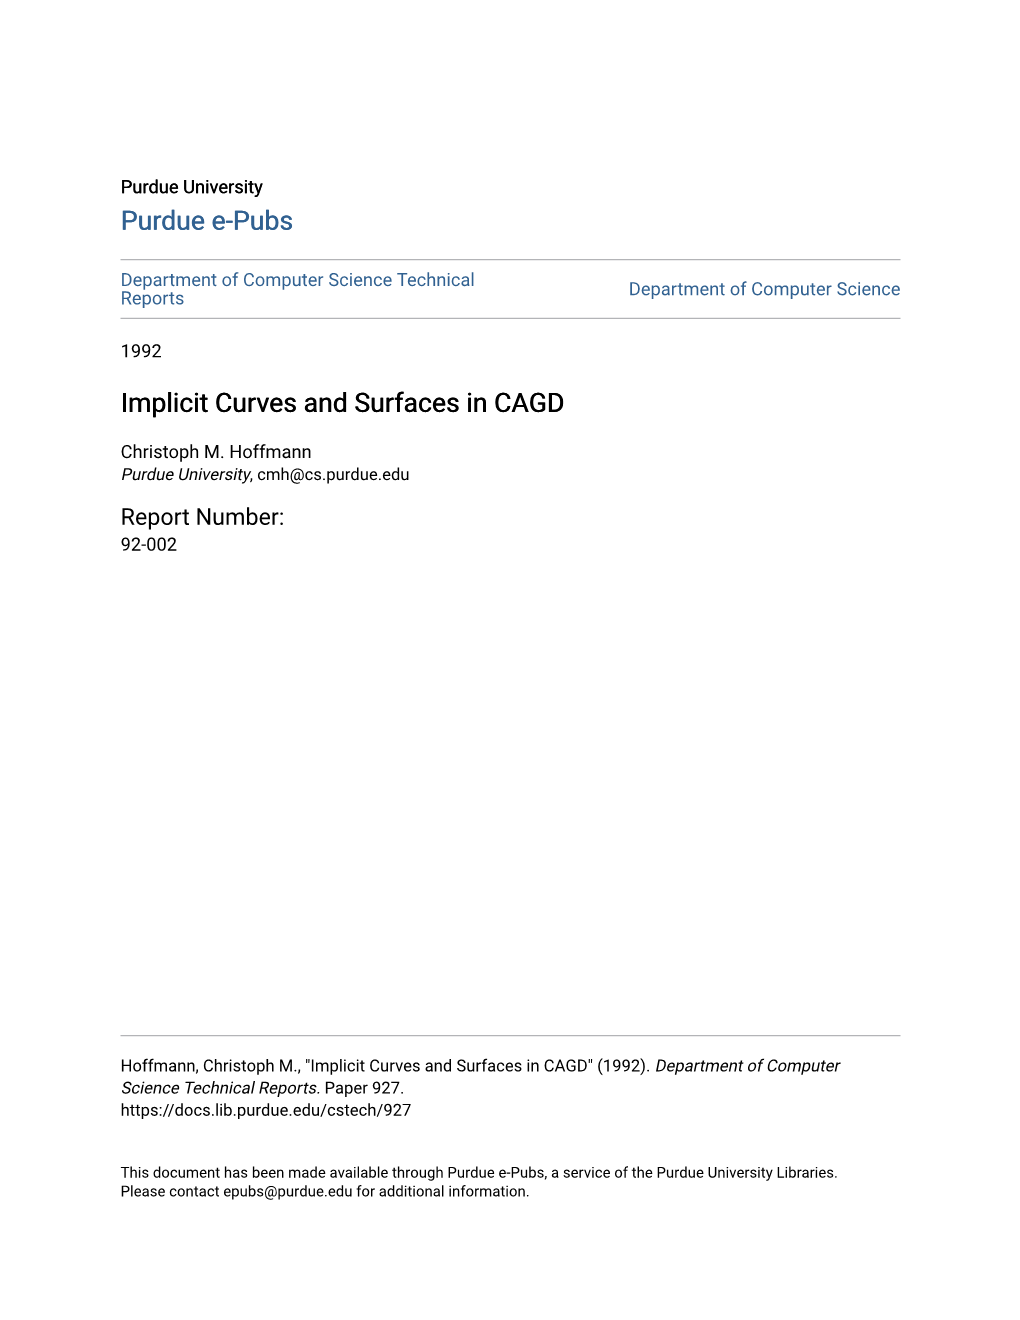 Implicit Curves and Surfaces in CAGD